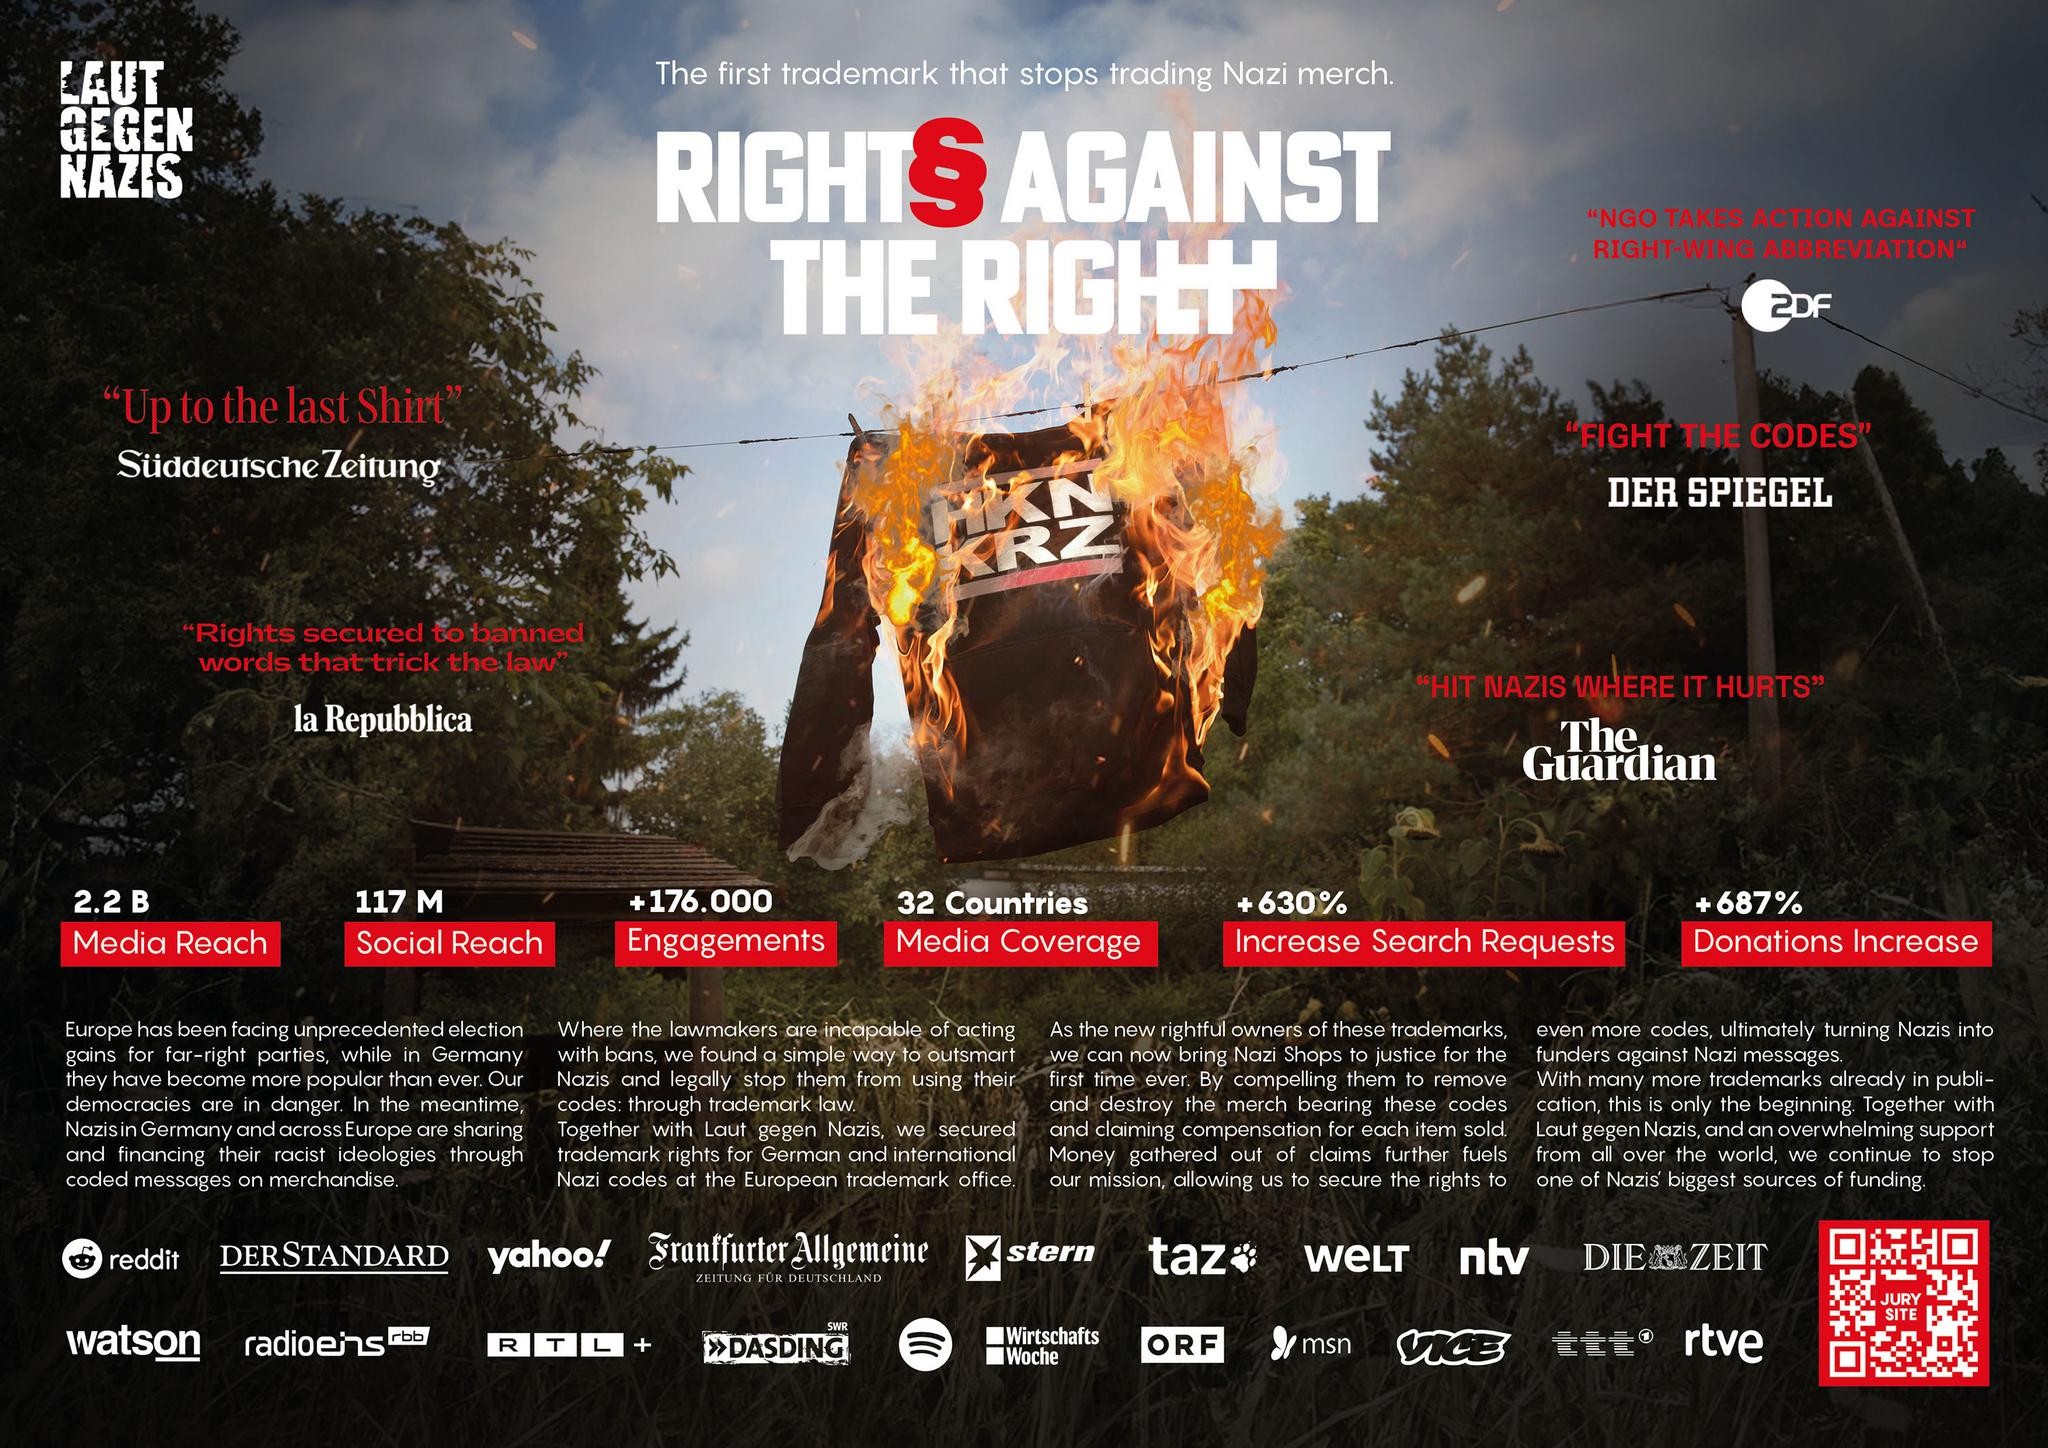 RIGHTS AGAINST THE RIGHT - THE FIRST TRADEMARK THAT STOPS TRADING NAZI MERCH.